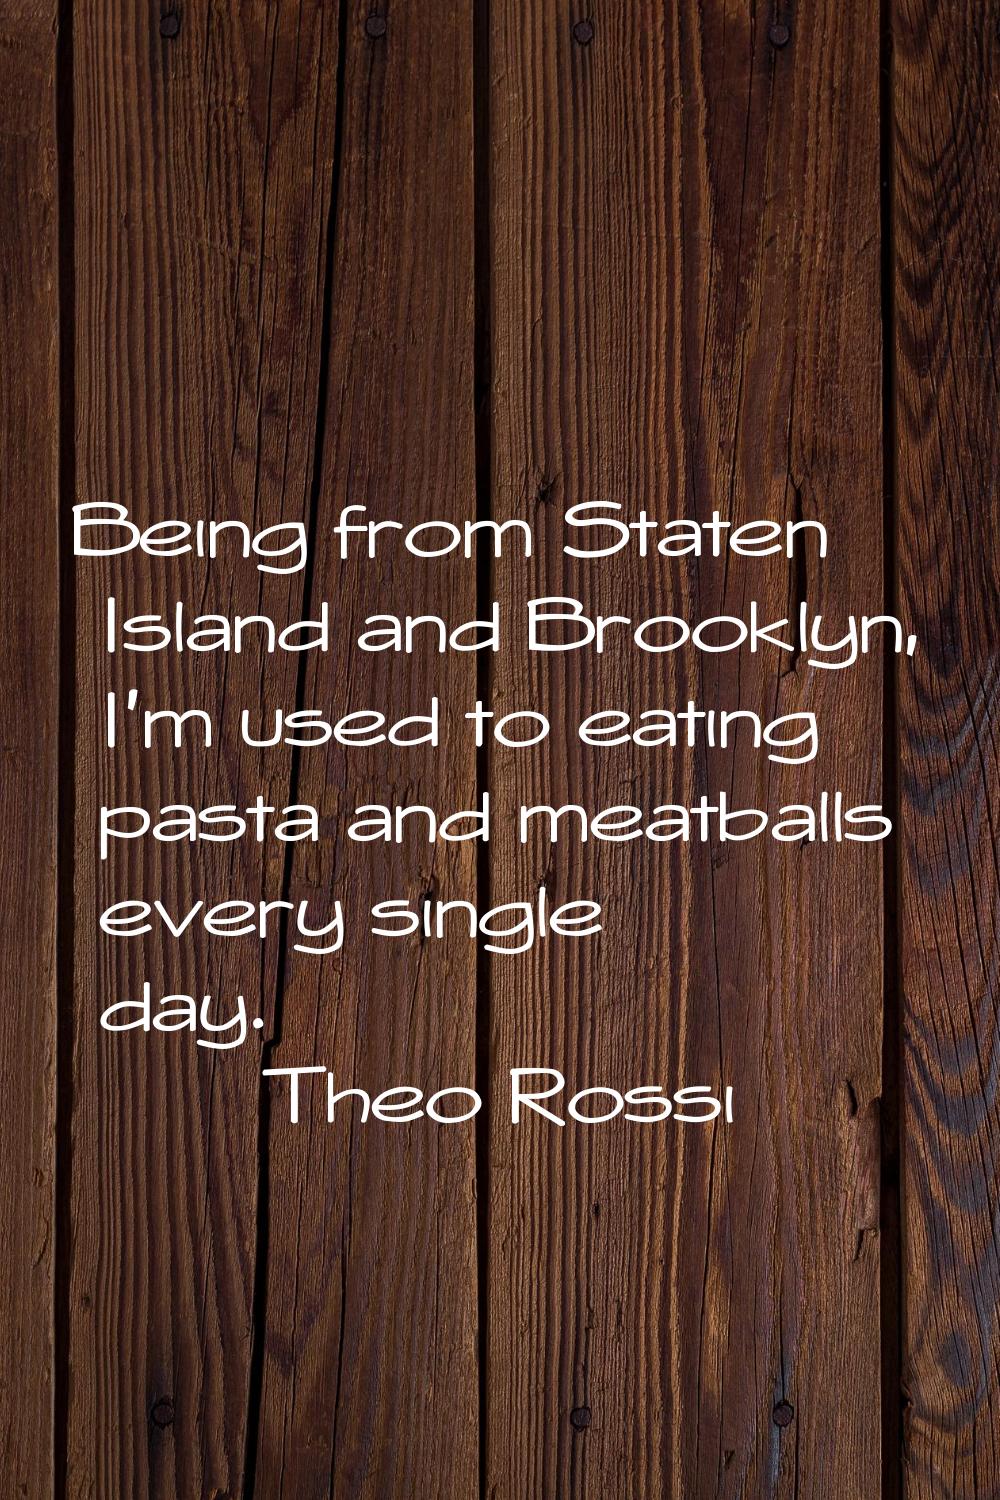 Being from Staten Island and Brooklyn, I'm used to eating pasta and meatballs every single day.